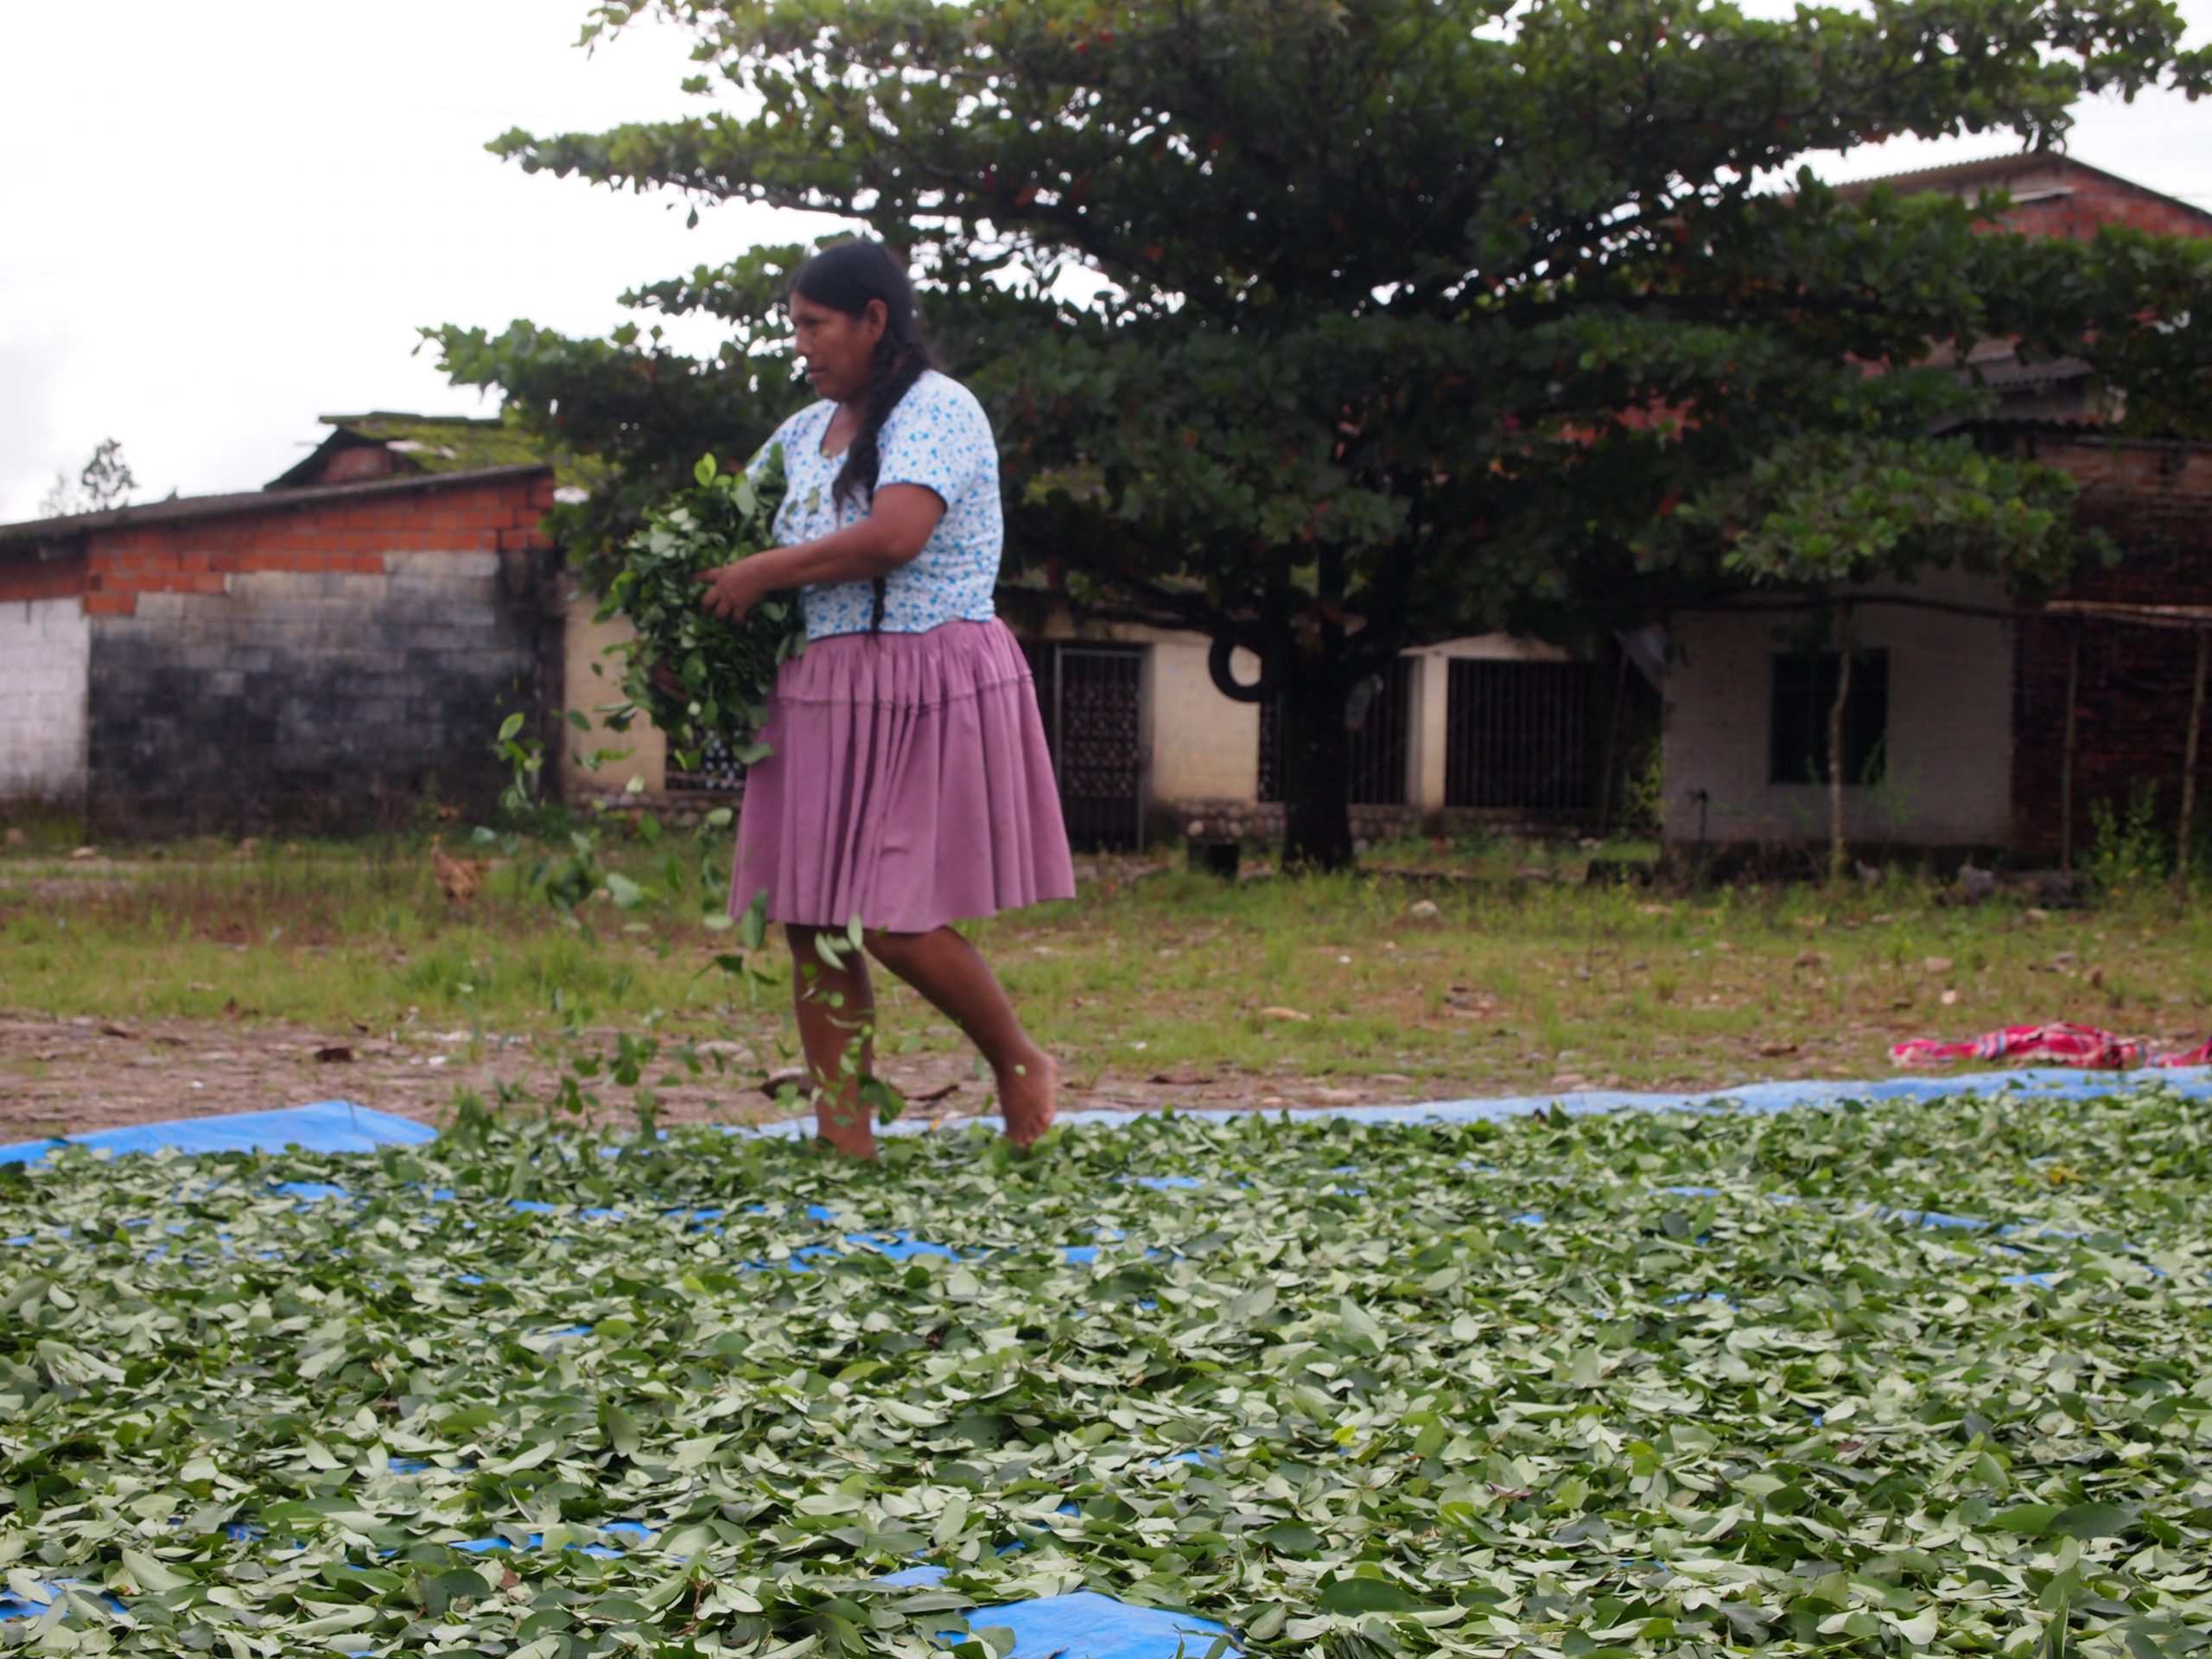 Working Paper: Rural women’s rights: the impact of organizing by Bolivia’s coca growing women